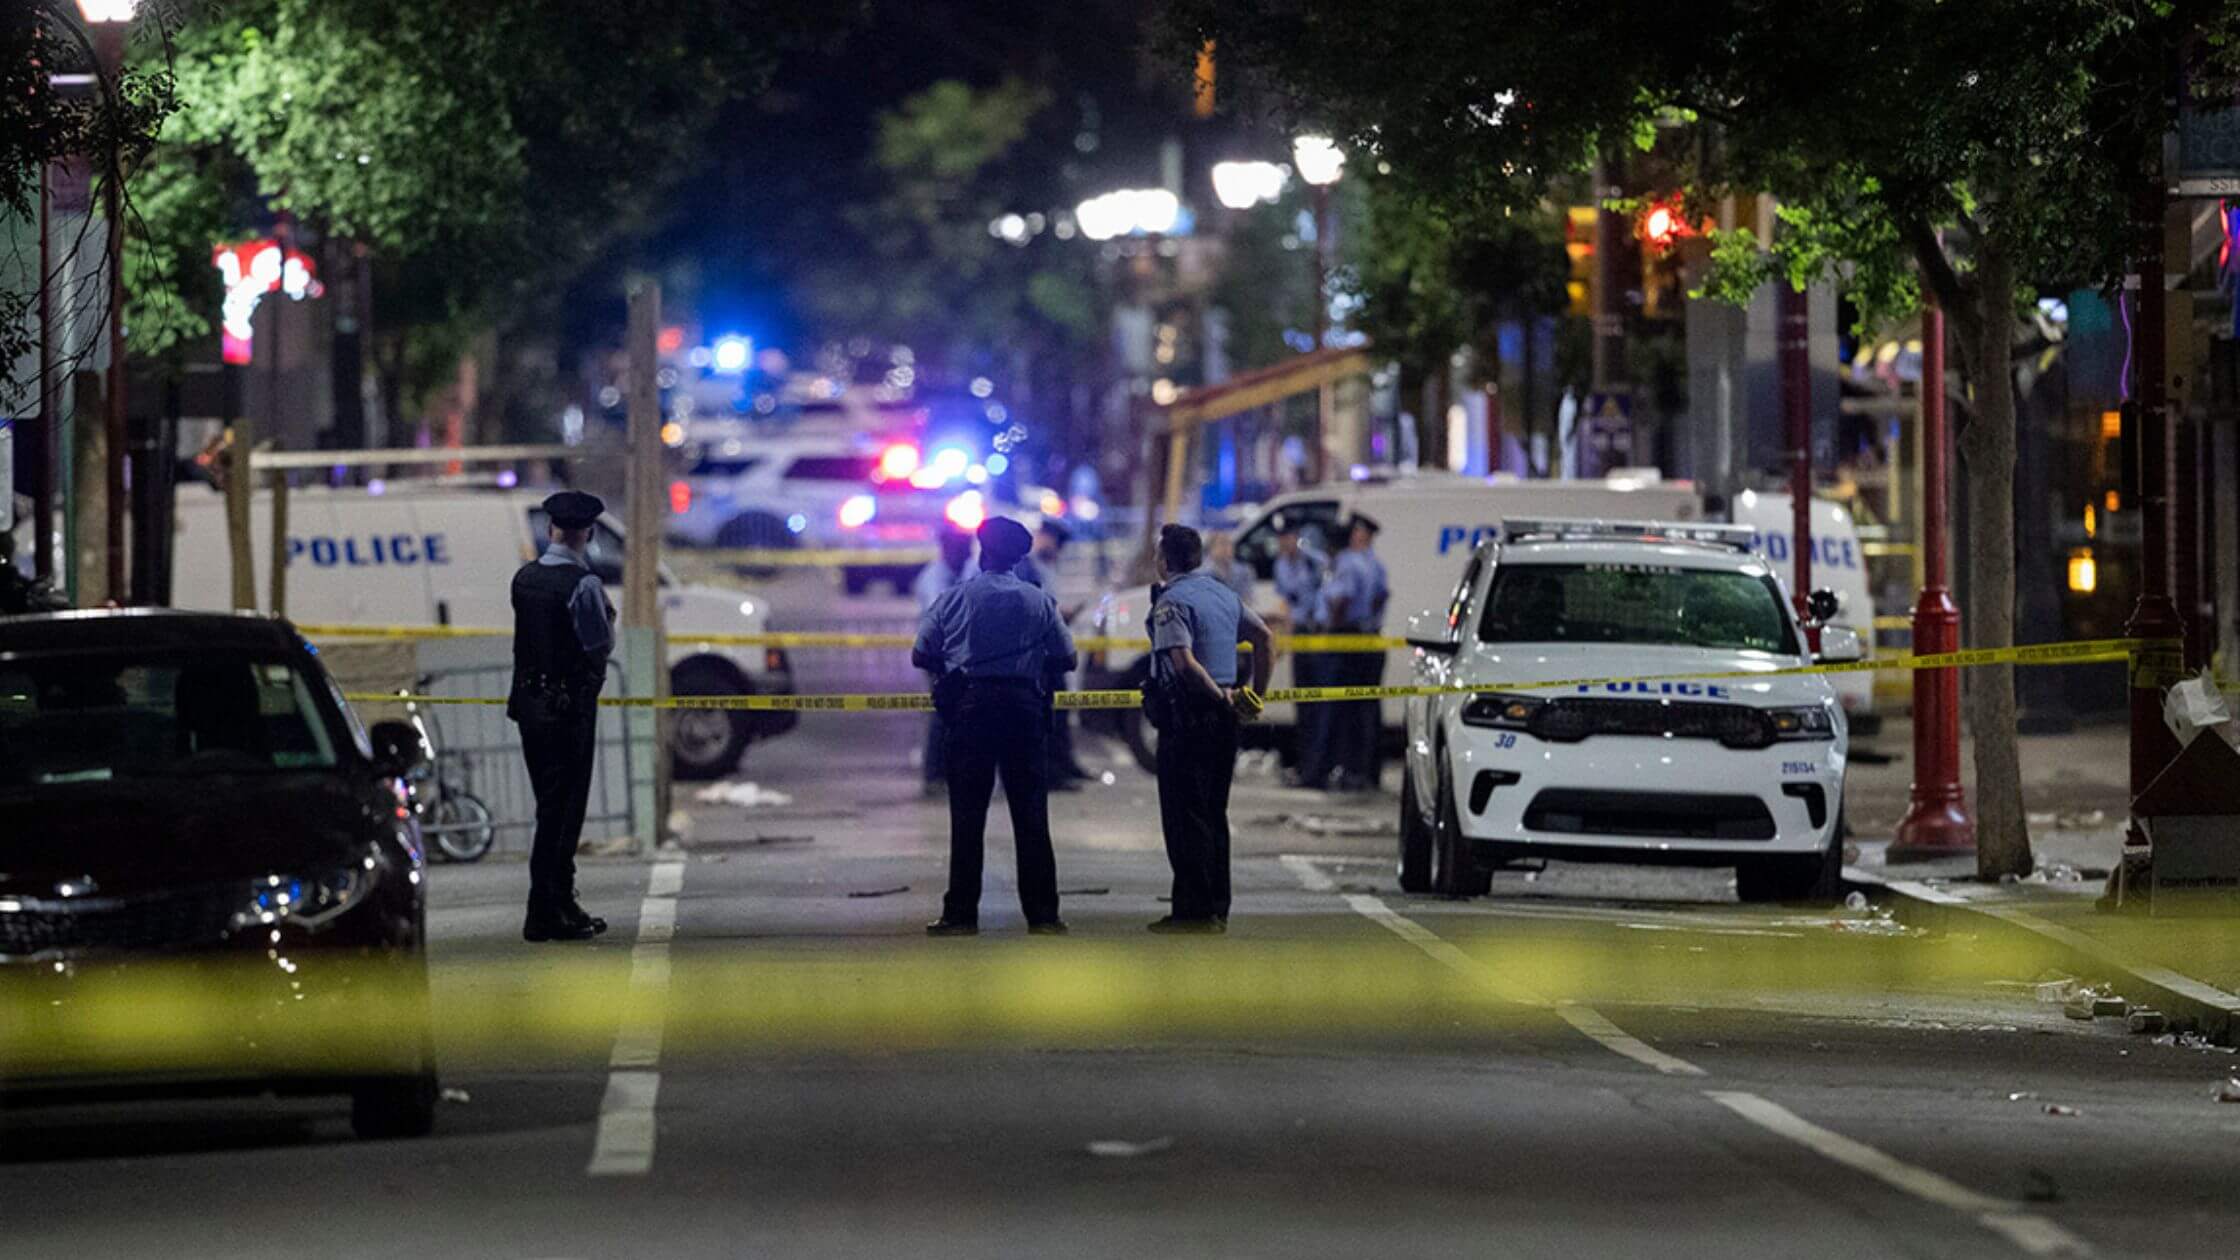 Two Police Officers Were Shot During A July 4 Celebration In Philadelphia